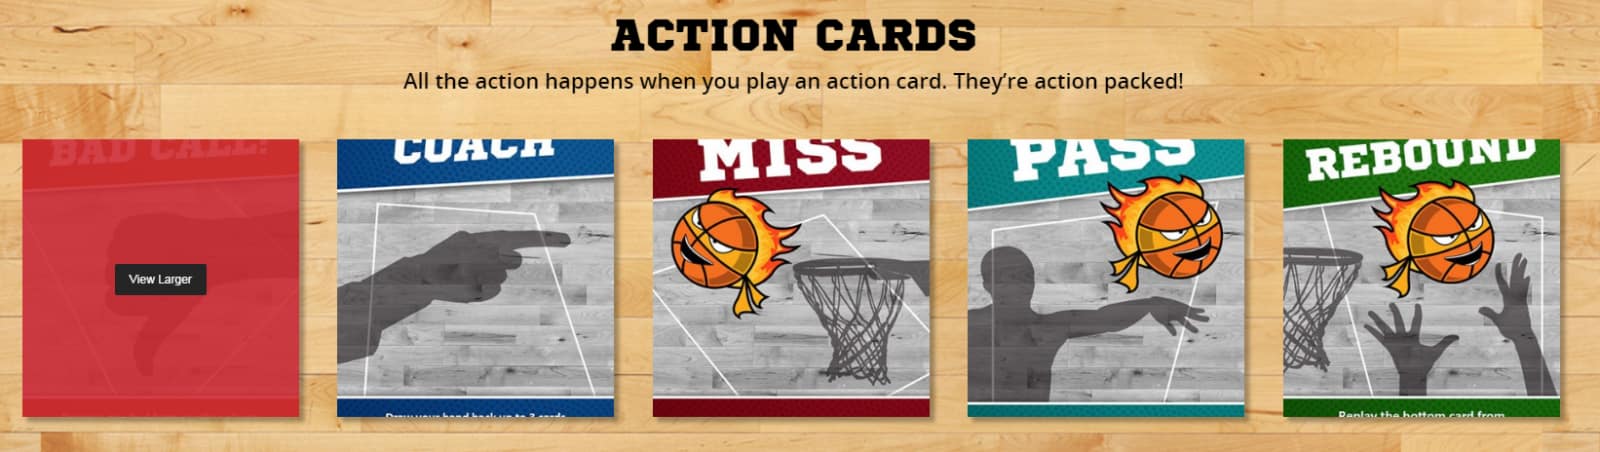 bball blitz action cards